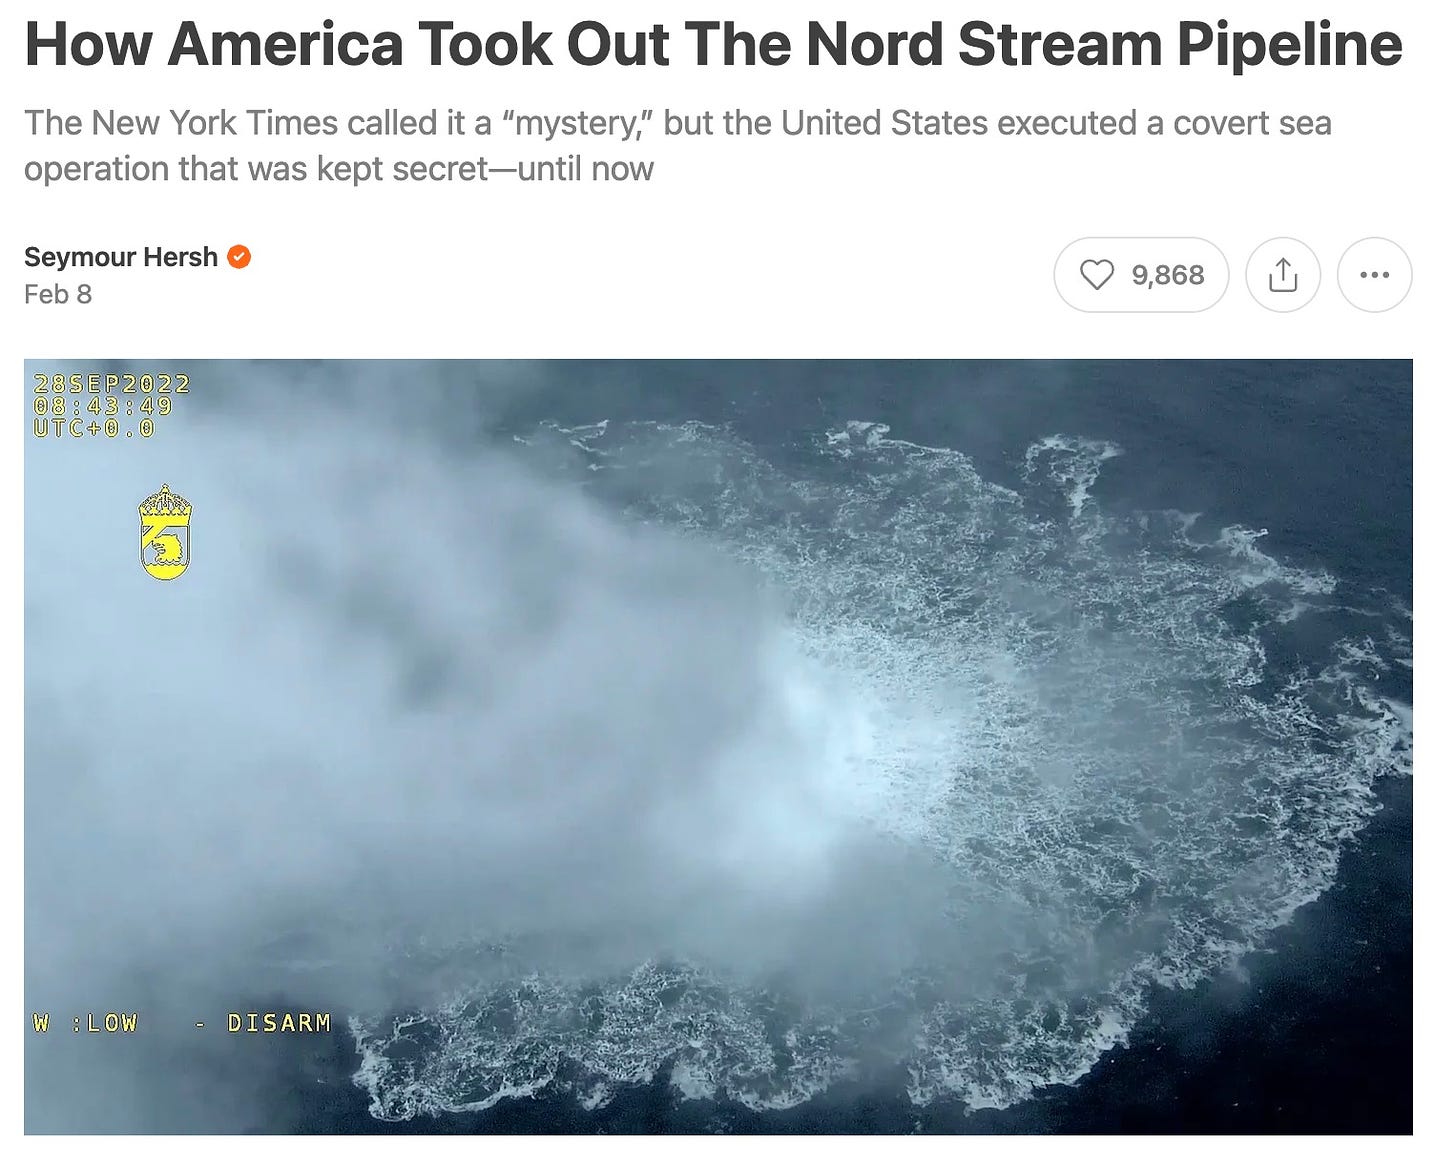 Headline and hero image for "How America Took Out the Nord Stream Pipeline" by Seymour Hersh